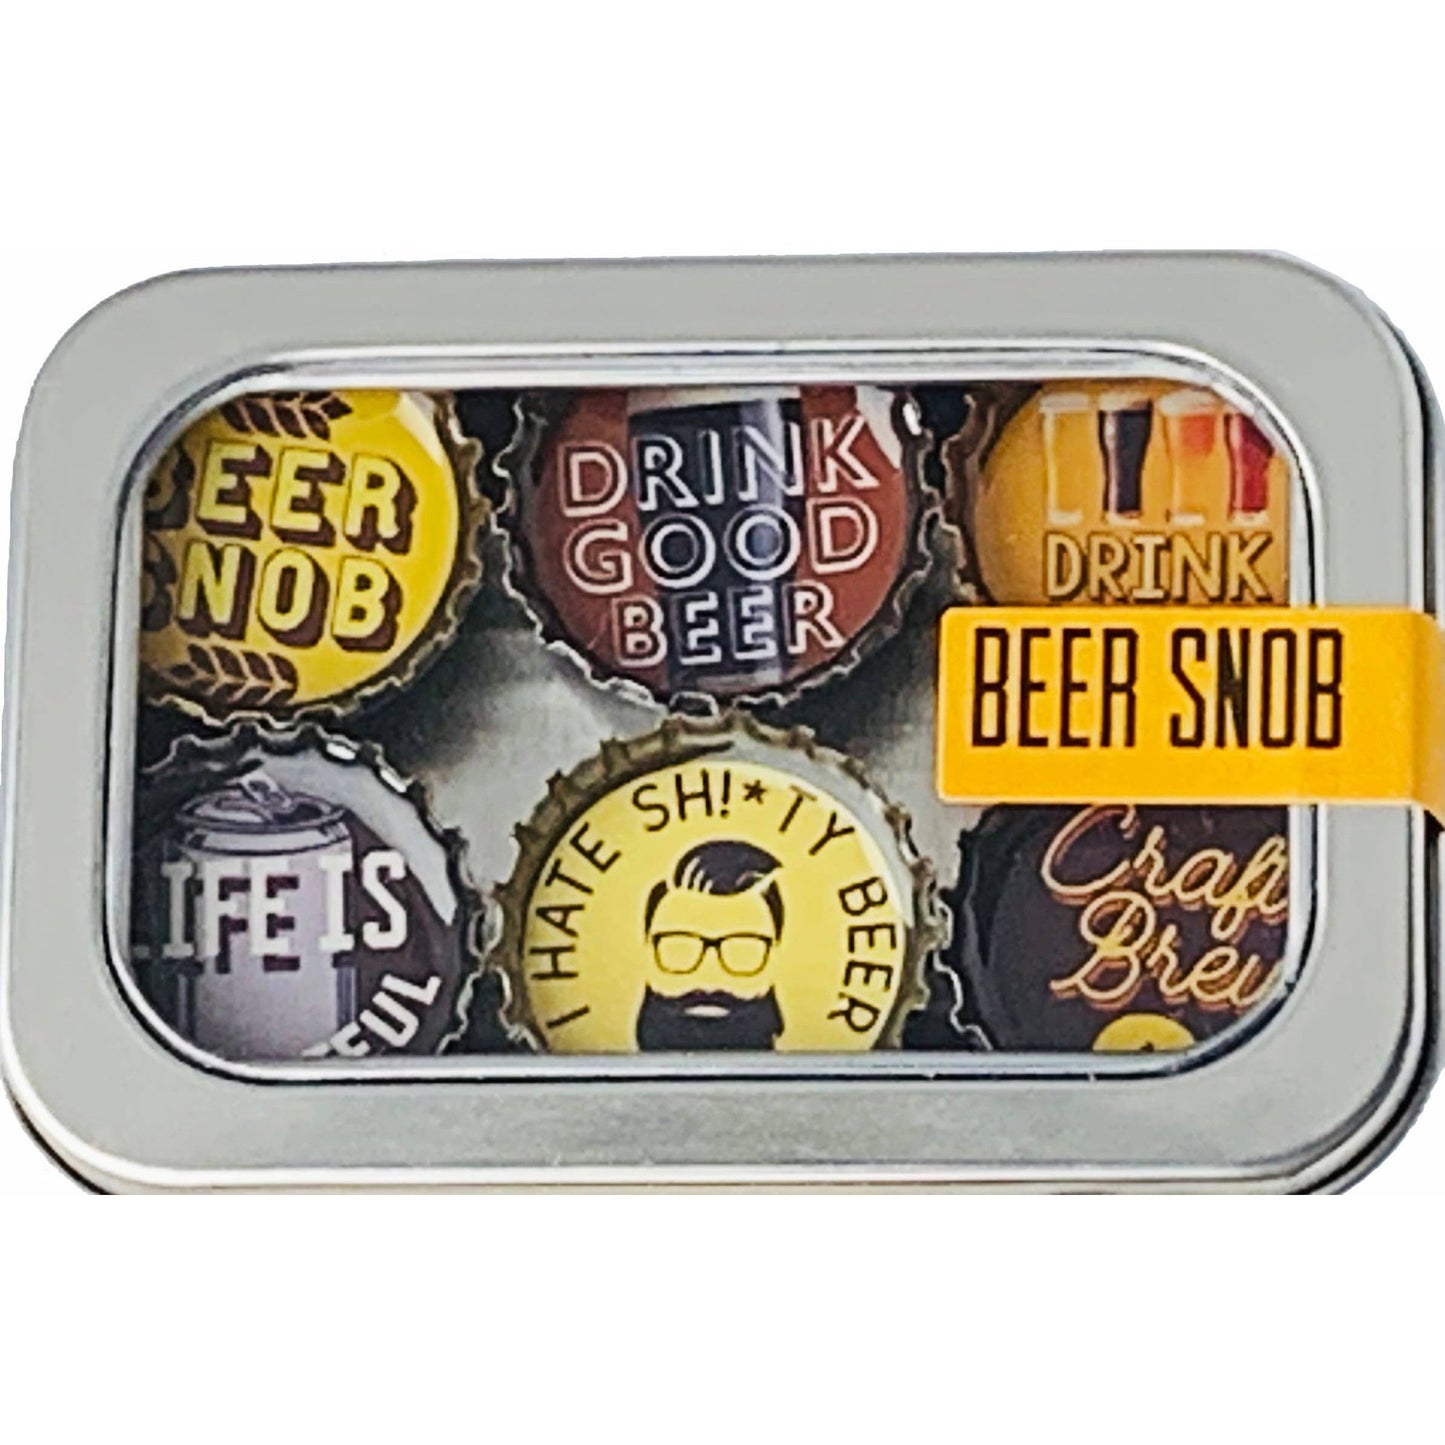 Beer Snob Magnets 6 Pack | Round Bottle-Cap Style Magnet Set in a Gift Tin